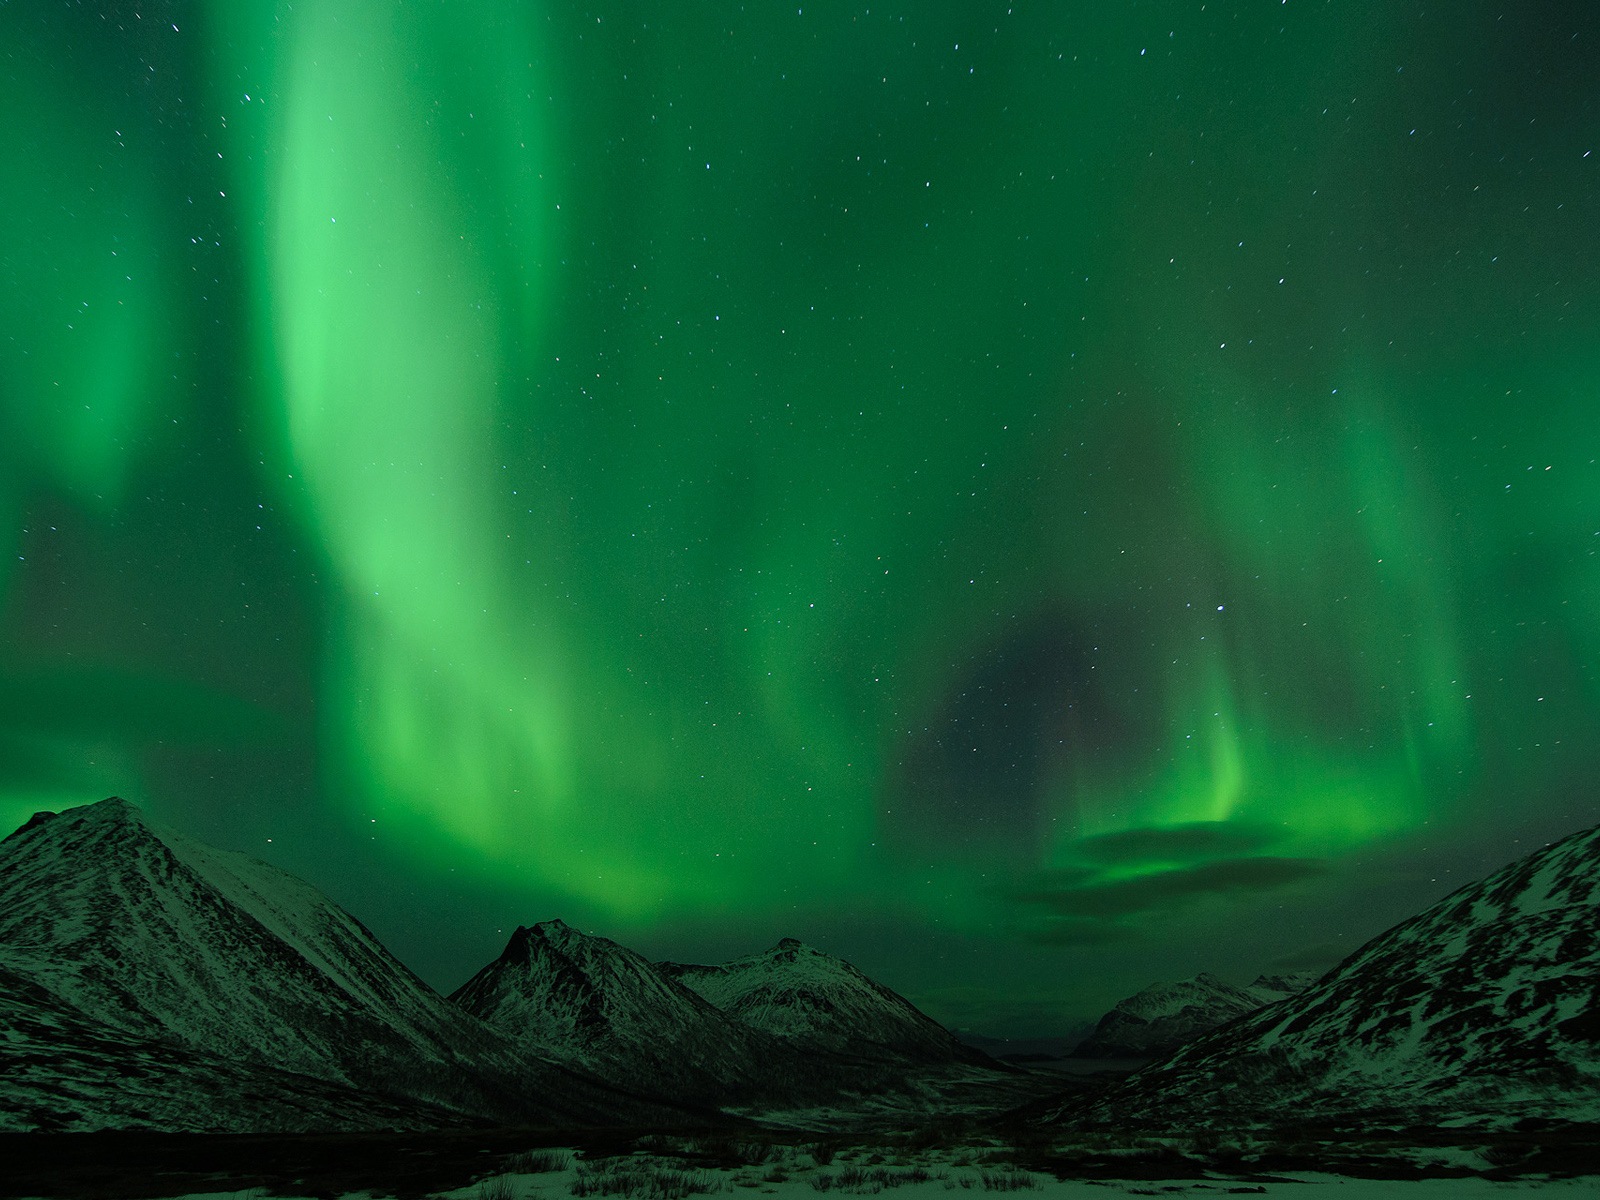 Natural wonders of the Northern Lights HD Wallpaper (1) #20 - 1600x1200